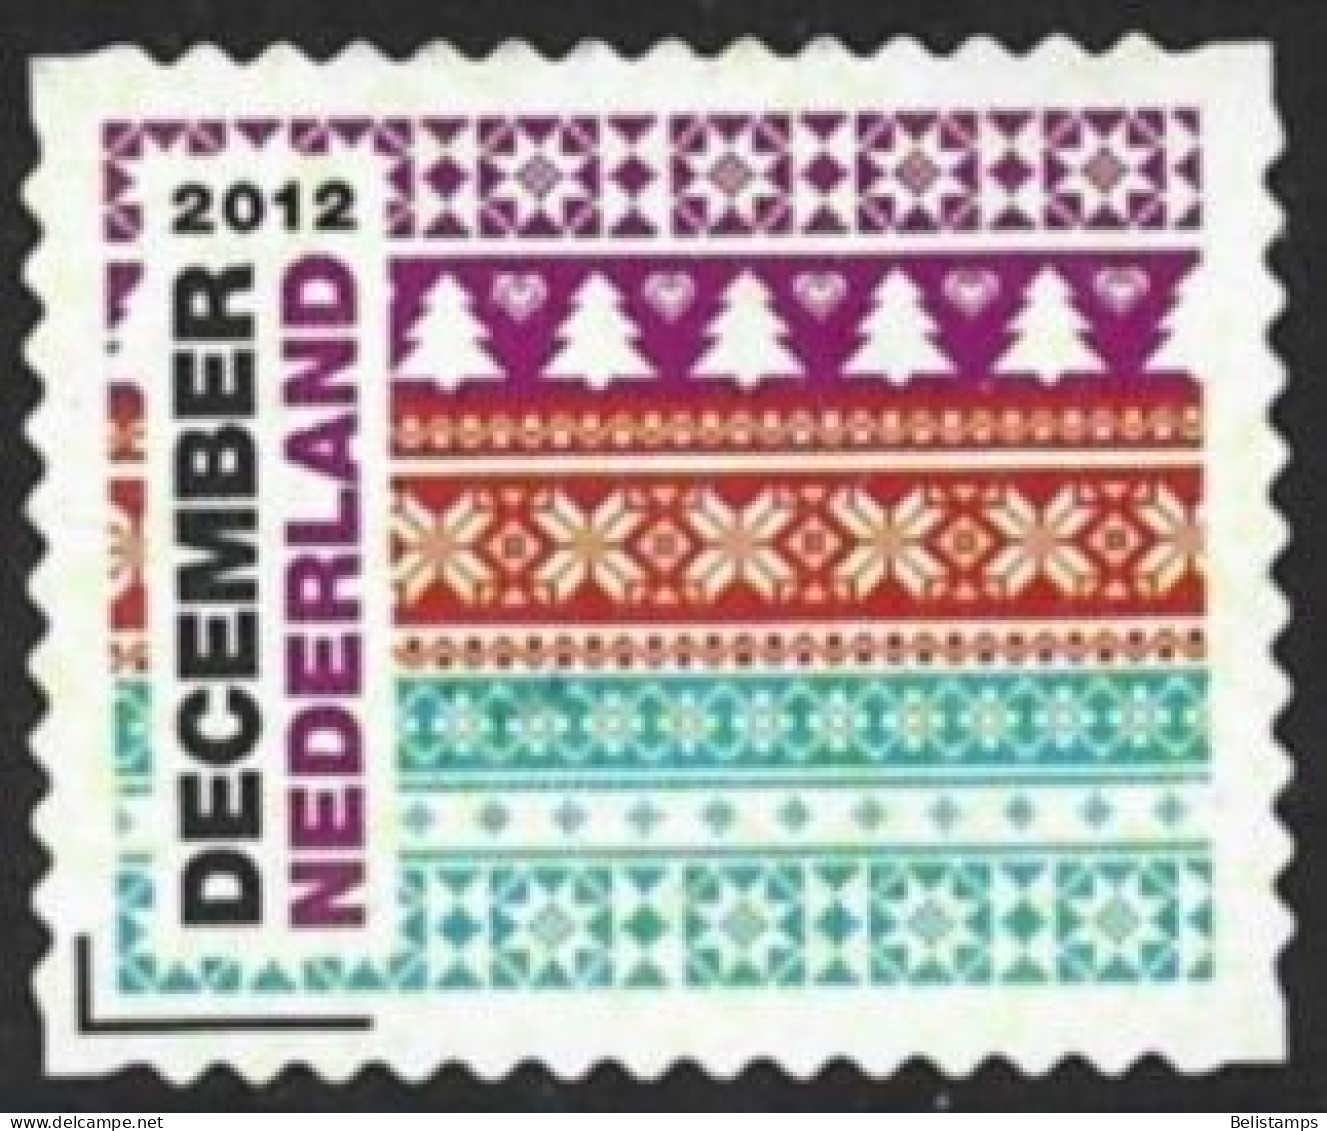 Netherlands 2012. Scott #1428a (U) December Stamp, Christmas Trees And Hearts - Used Stamps